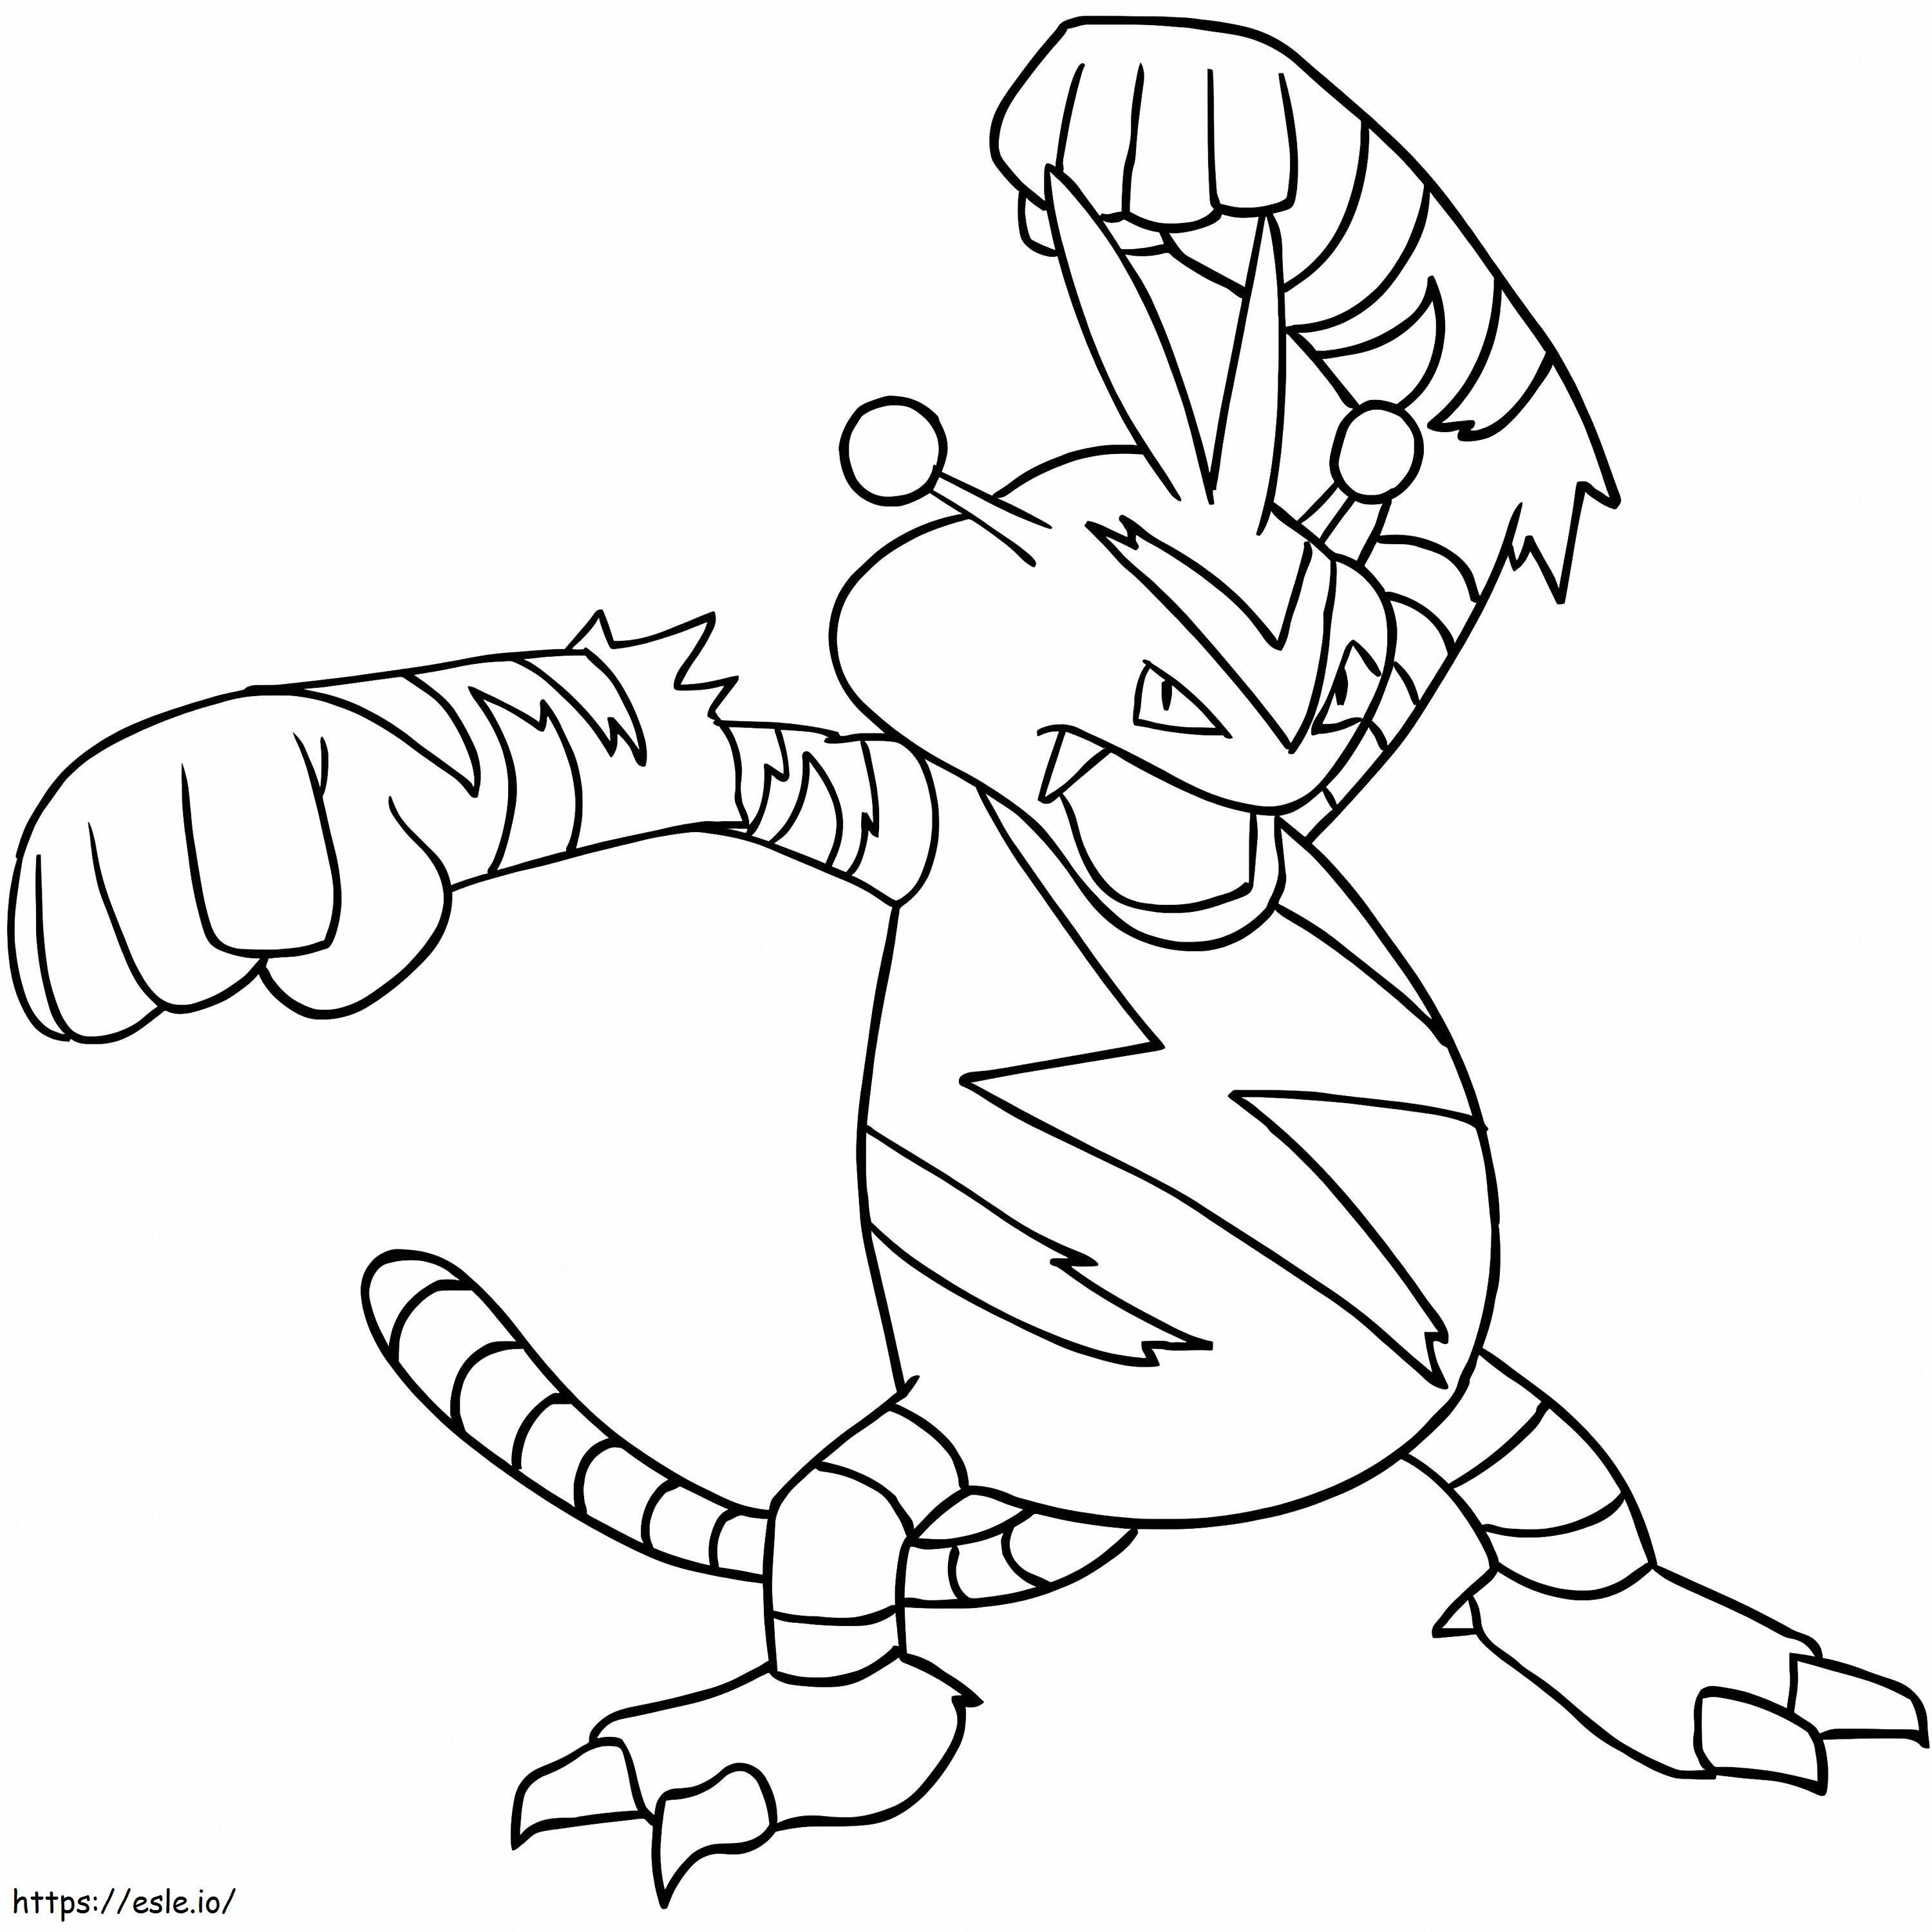 Printable Electabuzz coloring page